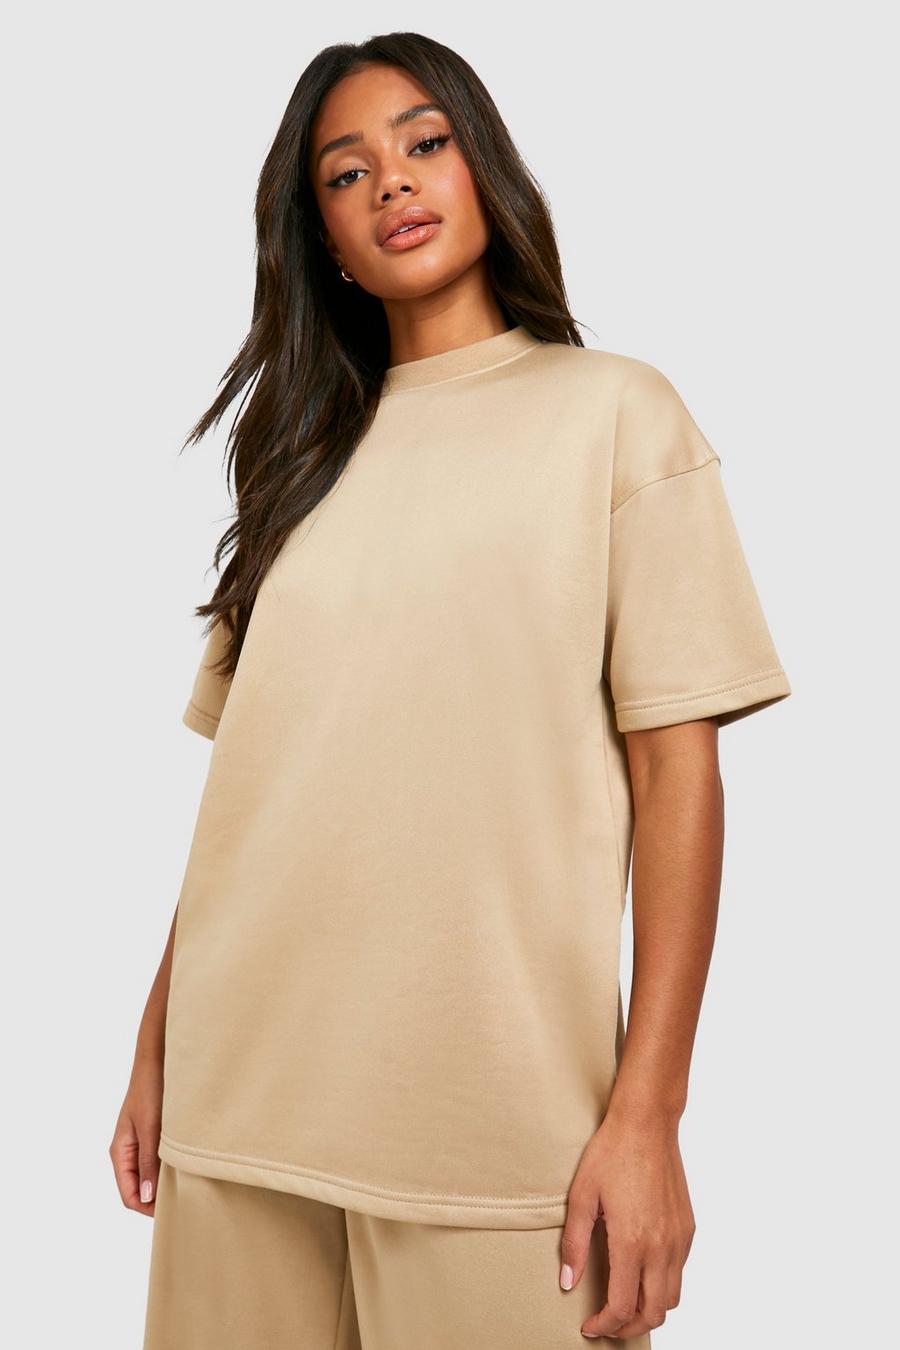 Superweiches Frottee Oversize T-Shirt, Taupe